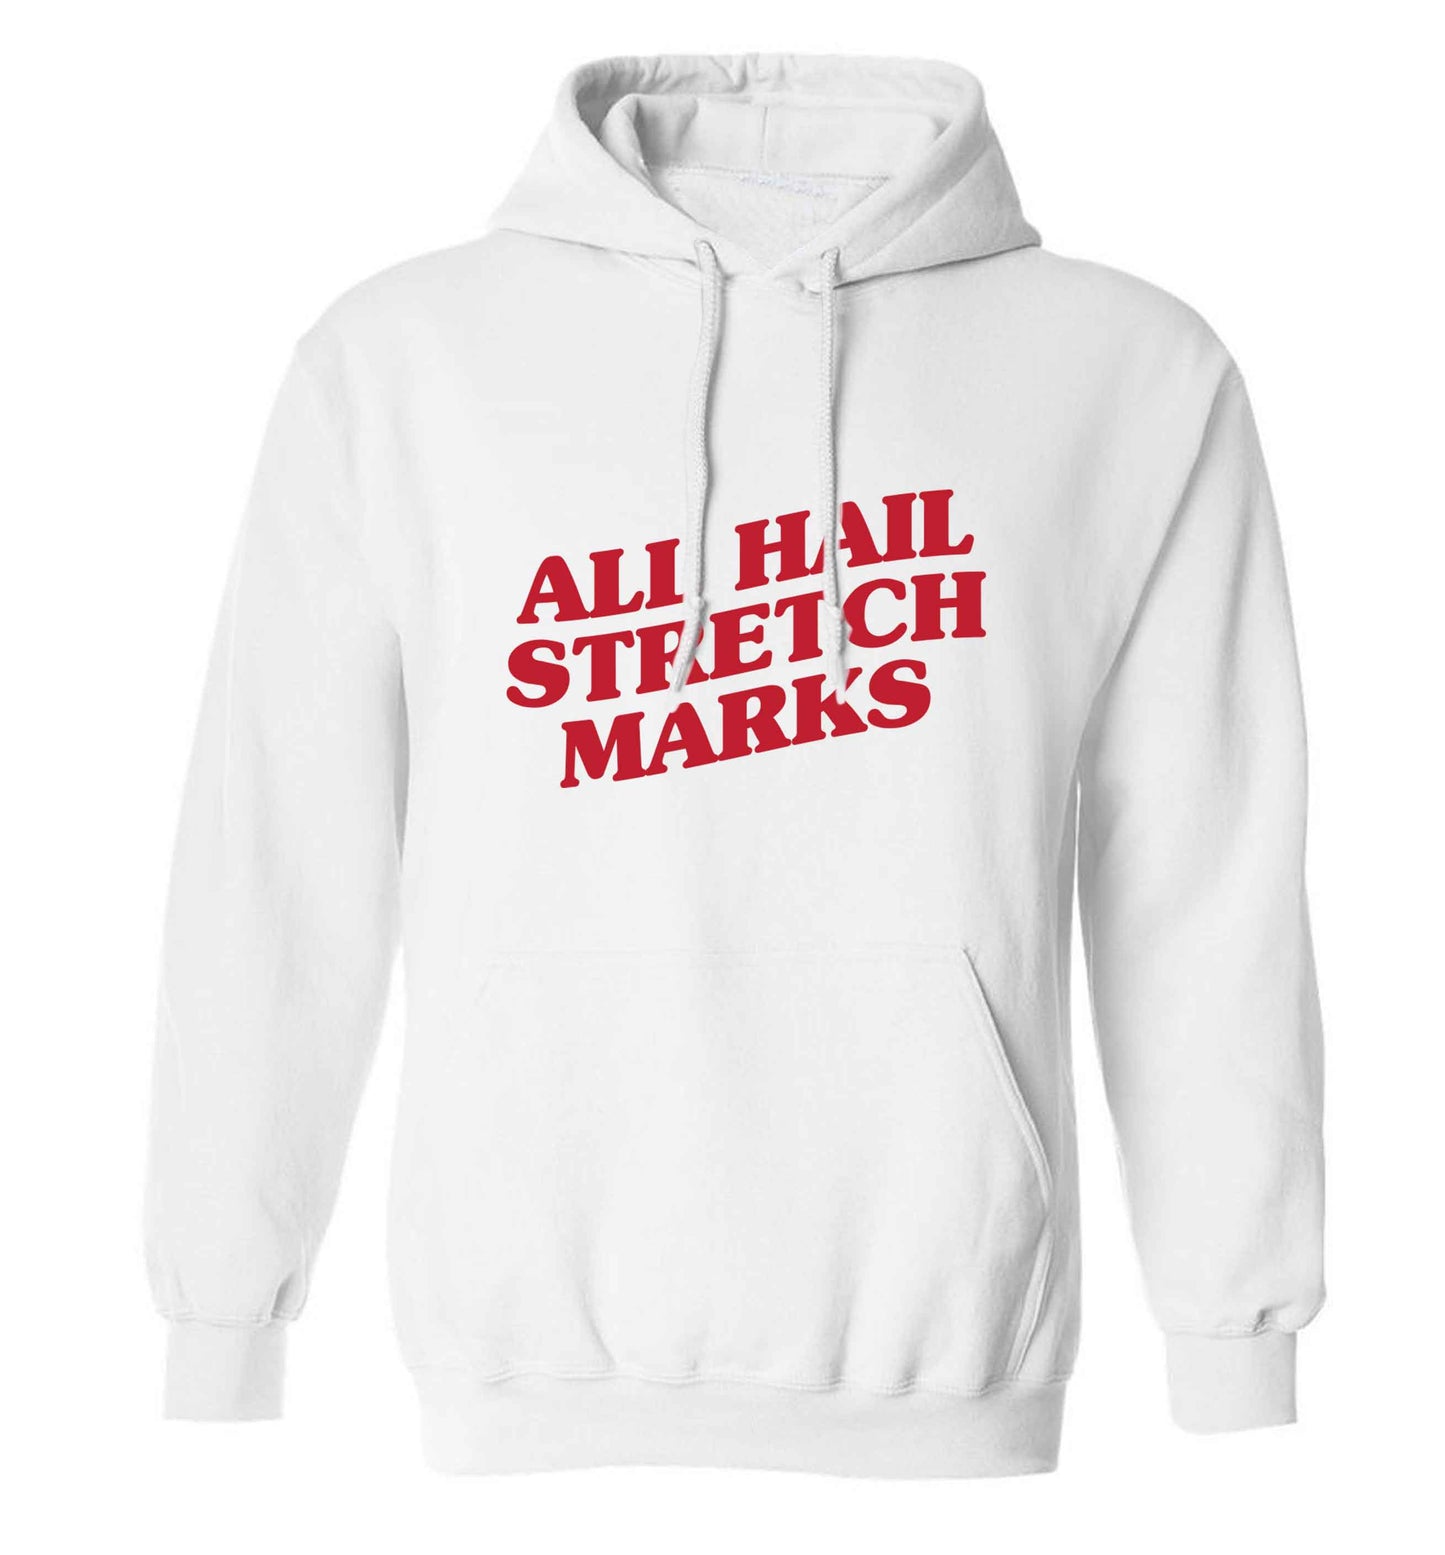 All hail stretch marks adults unisex white hoodie 2XL